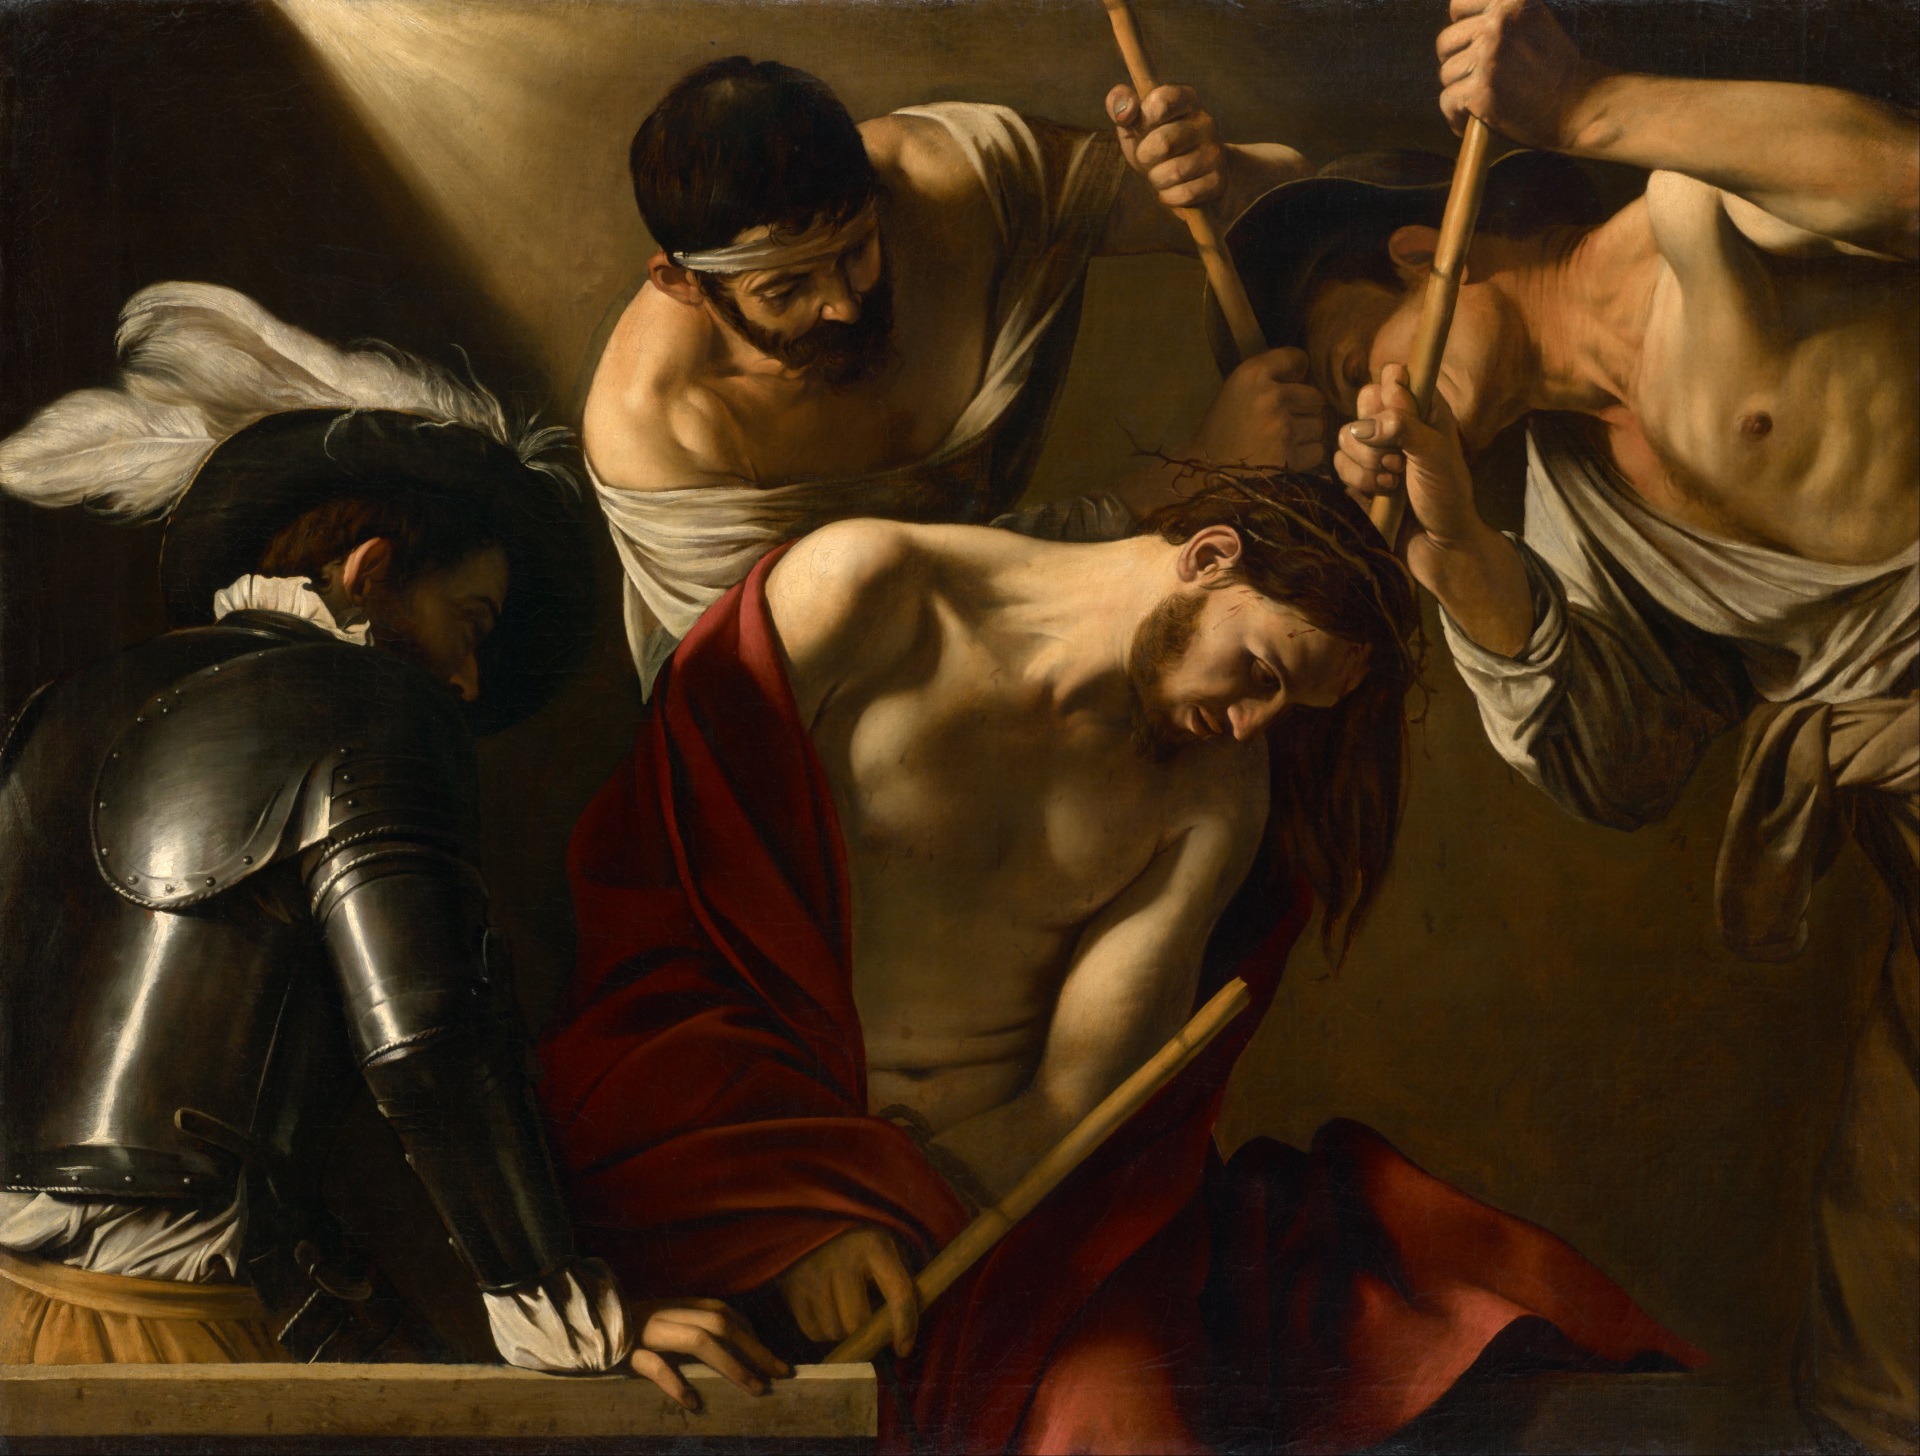 Caravaggio - The Crowning with Thorns 1602-1604